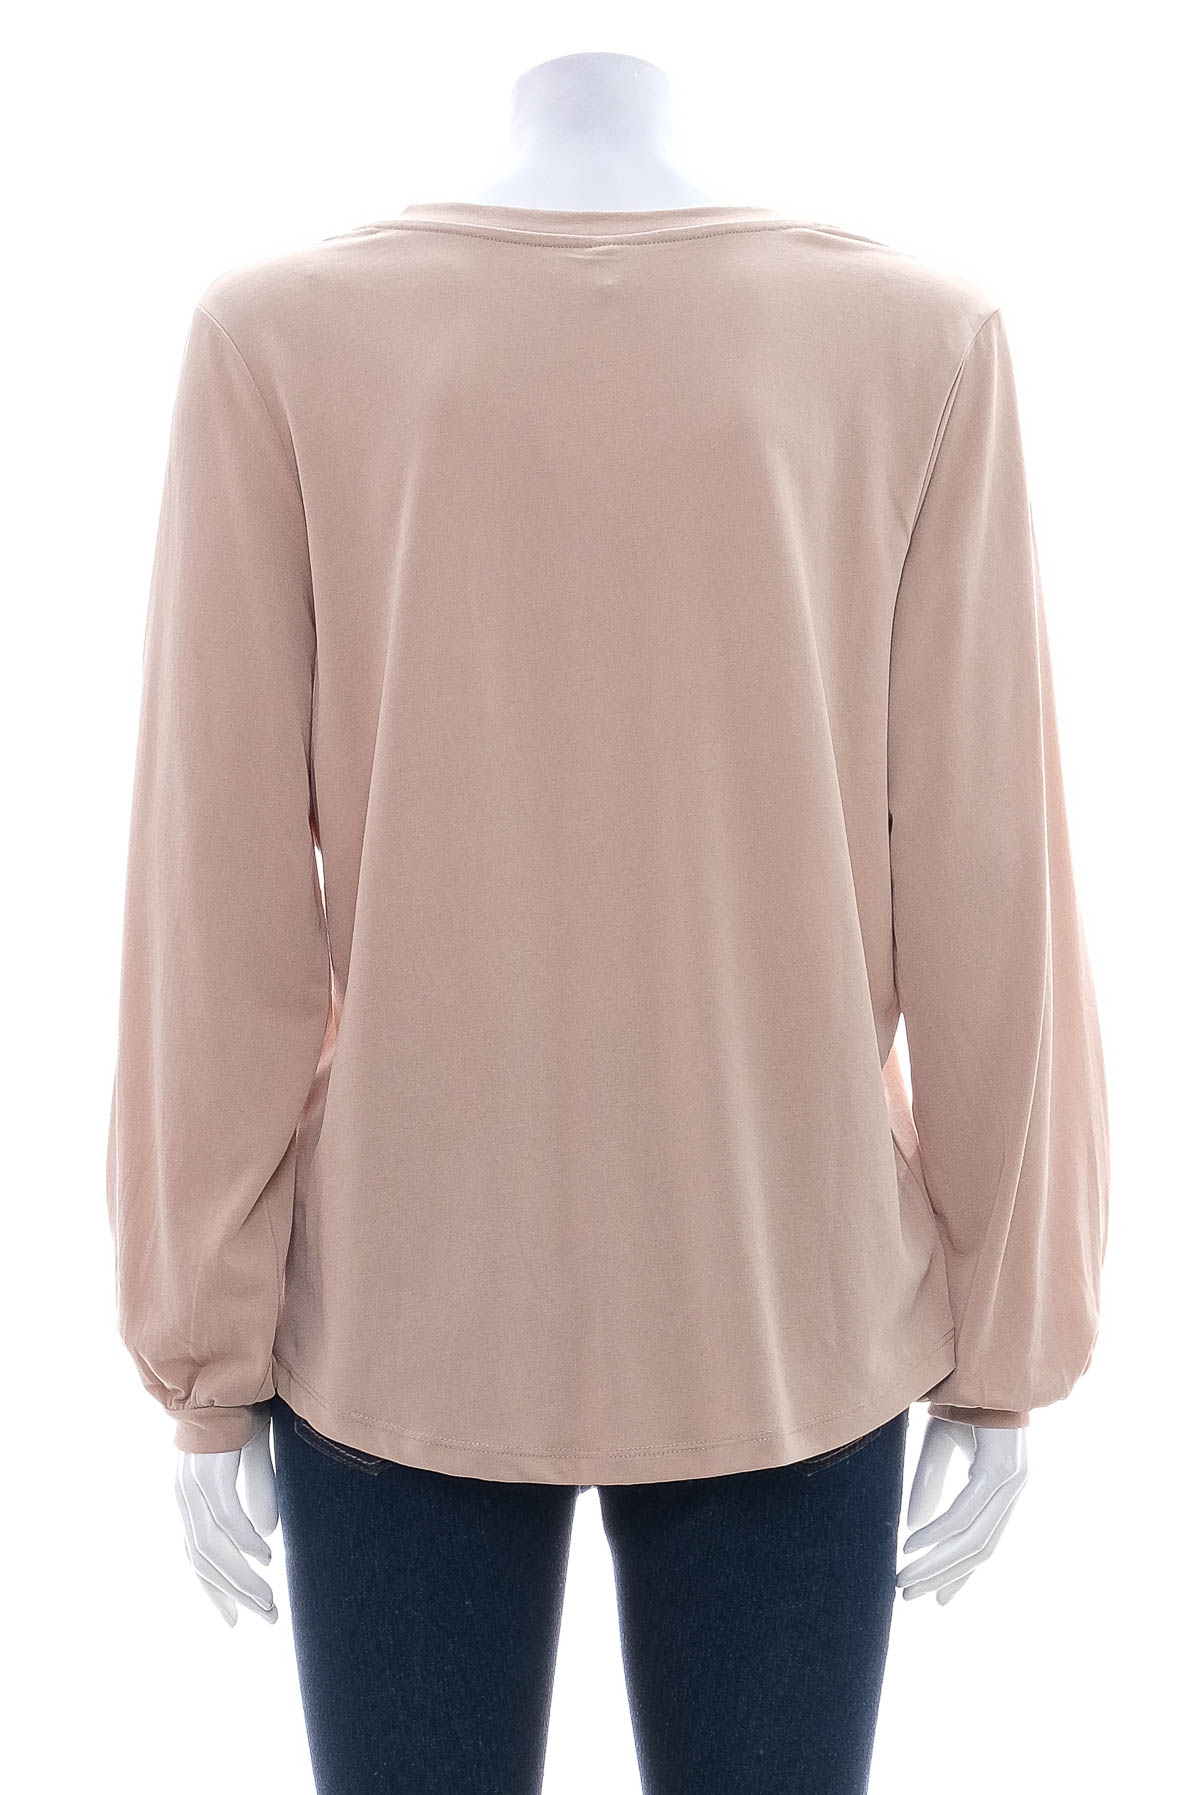 Women's blouse - ONLY - 1